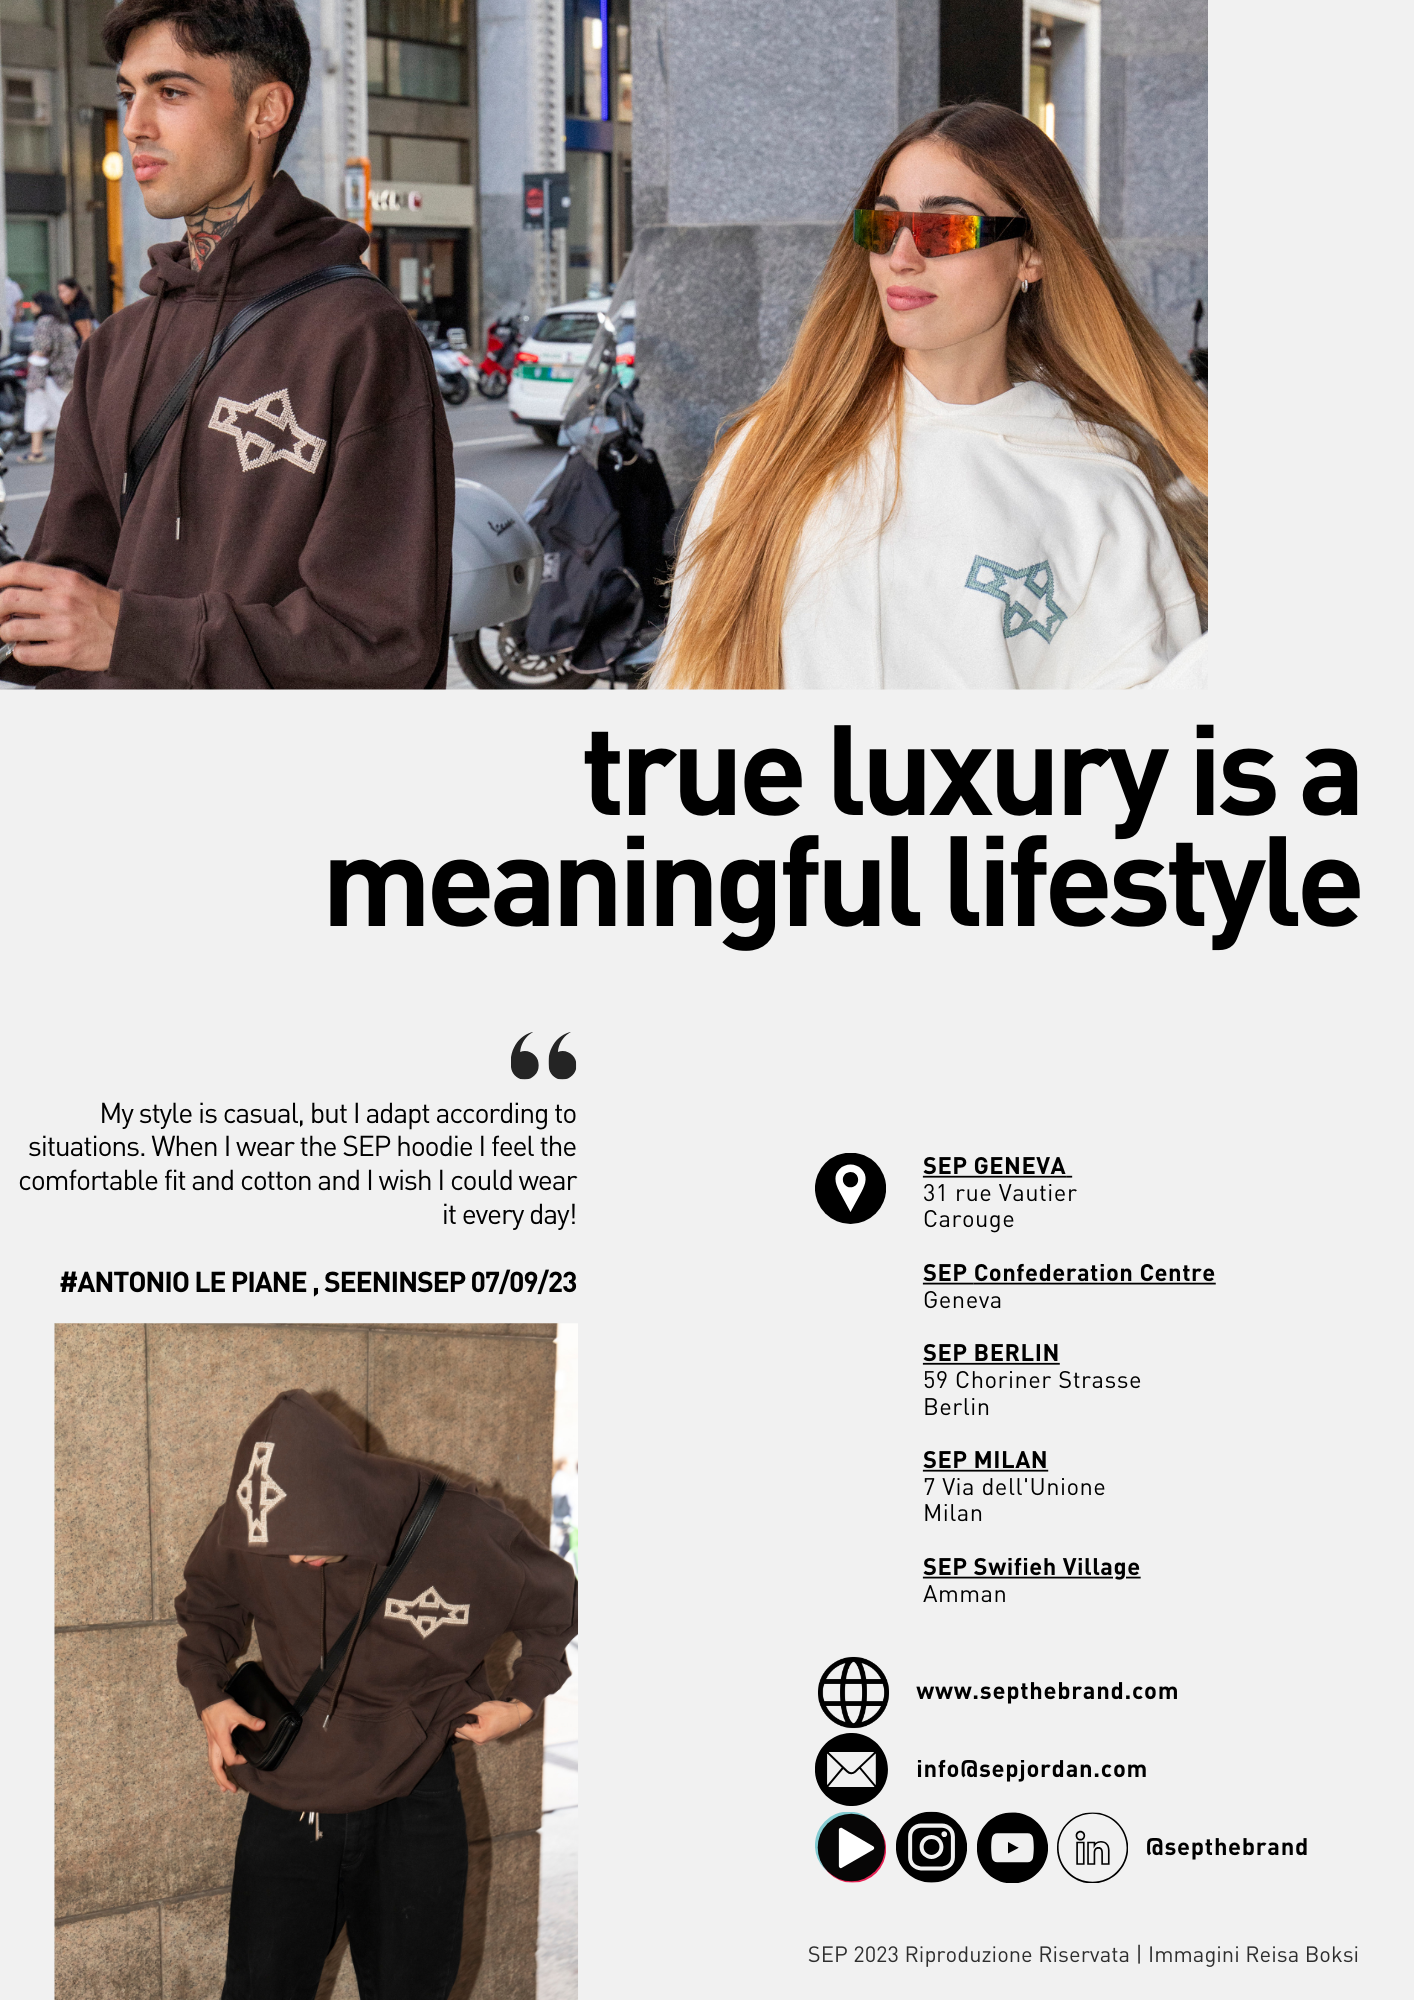 true luxury is a meaningful lifestyle